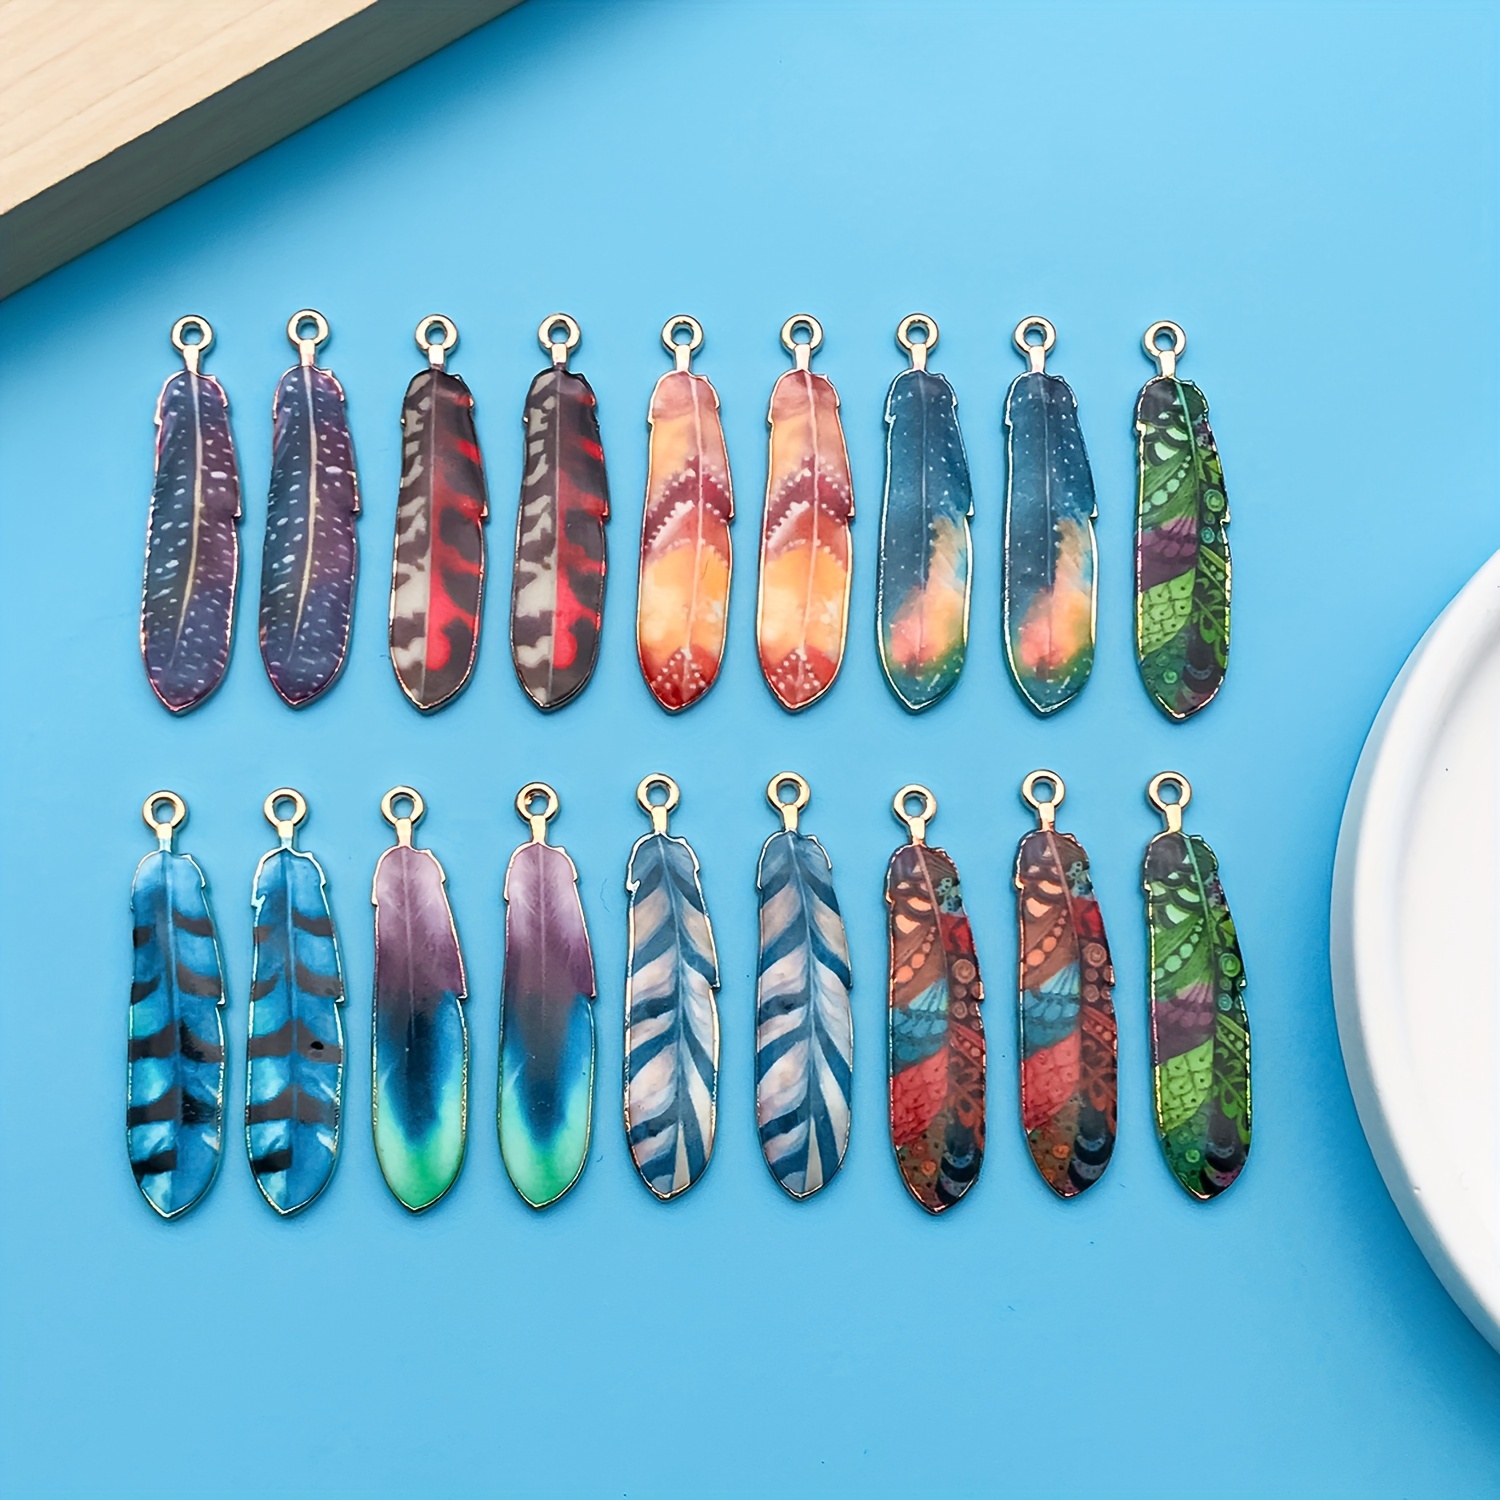 

18pcs/pack Enamel Alloy Charms Bohemian Ethnic Style Colorful Feather Pendants For Jewelry Making Findings Crafting Accessory For Diy Earrings Necklace Bracelet Keychain